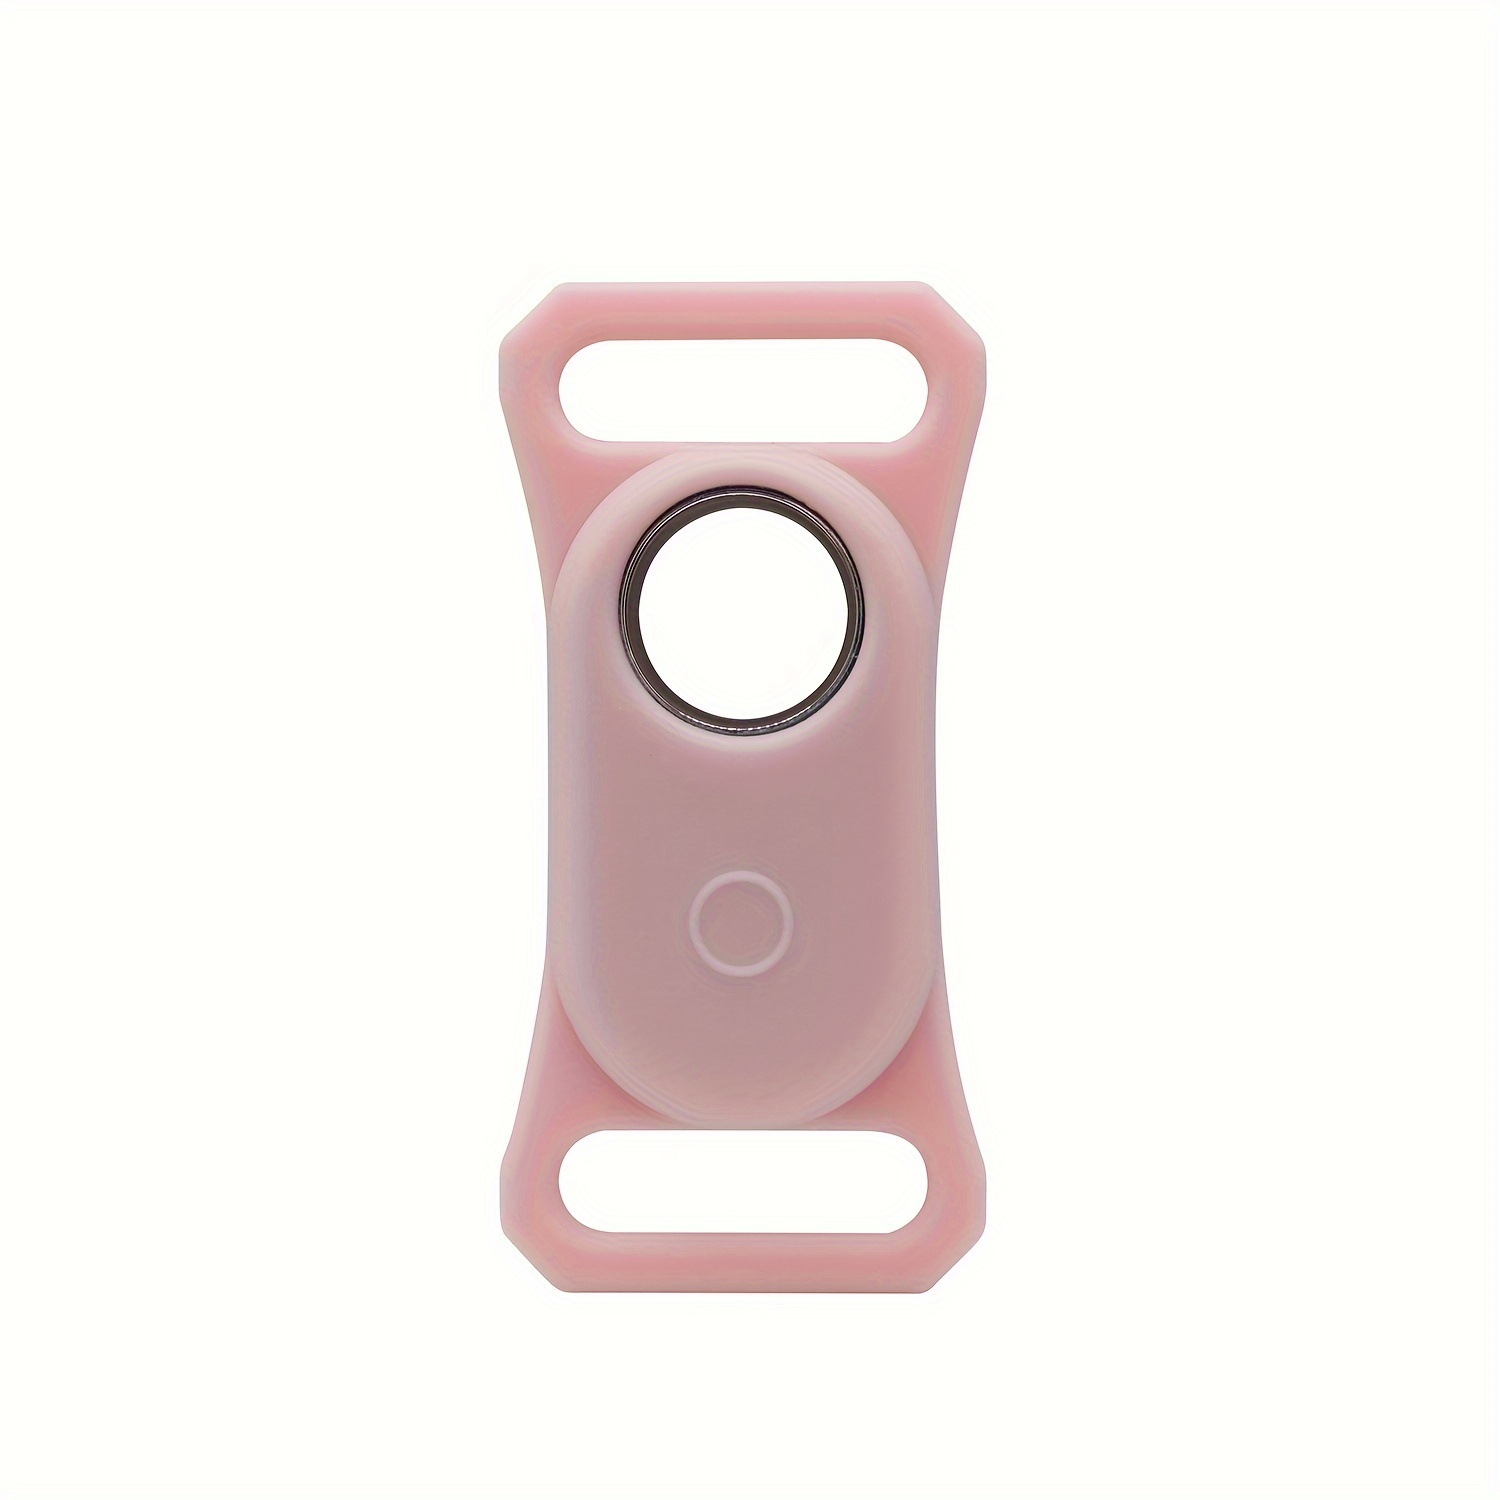  Silicone Case for Galaxy smartTag for Pets Dog Cat